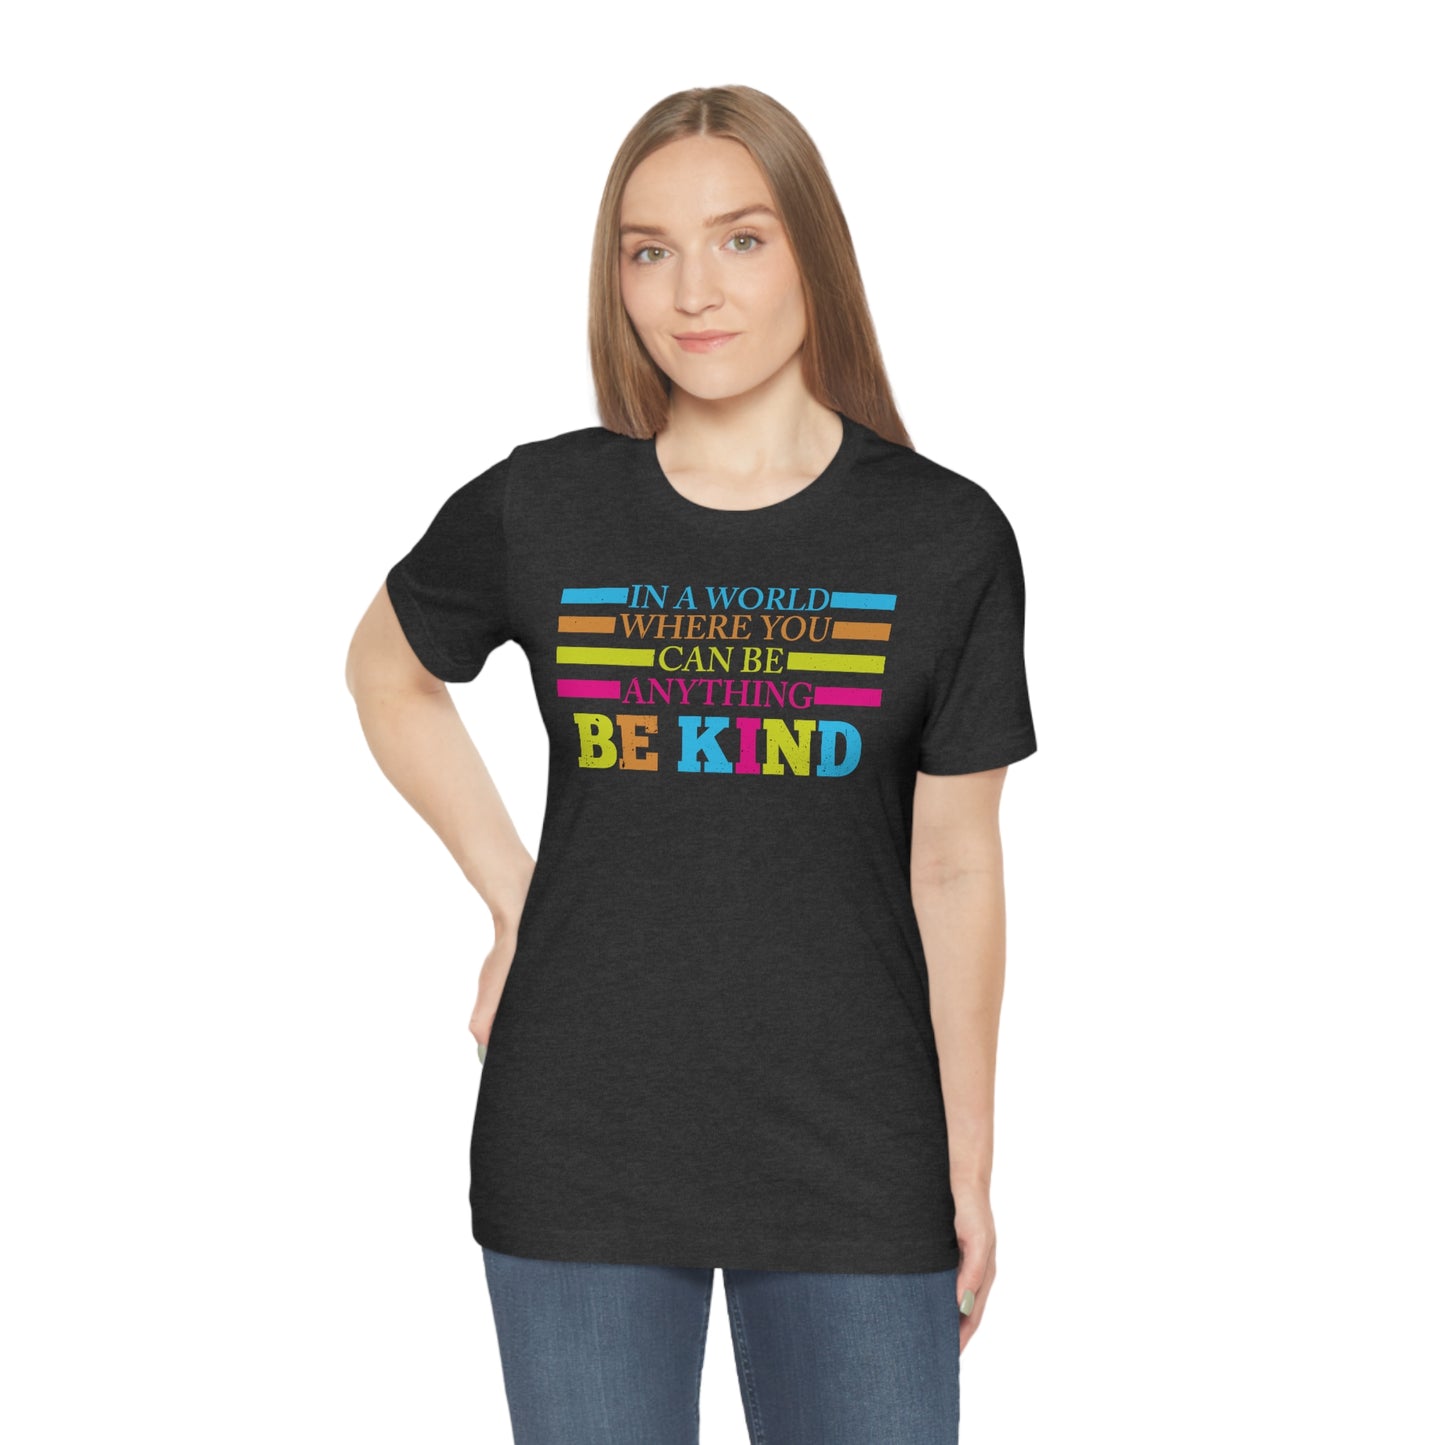 In A World Where You Can Be Anything Be Kind Shirt,Be Kind Rainbow Shirt,Be Kind Shirt,Language shirt,Kindness shirt,Watercolor Be Kind